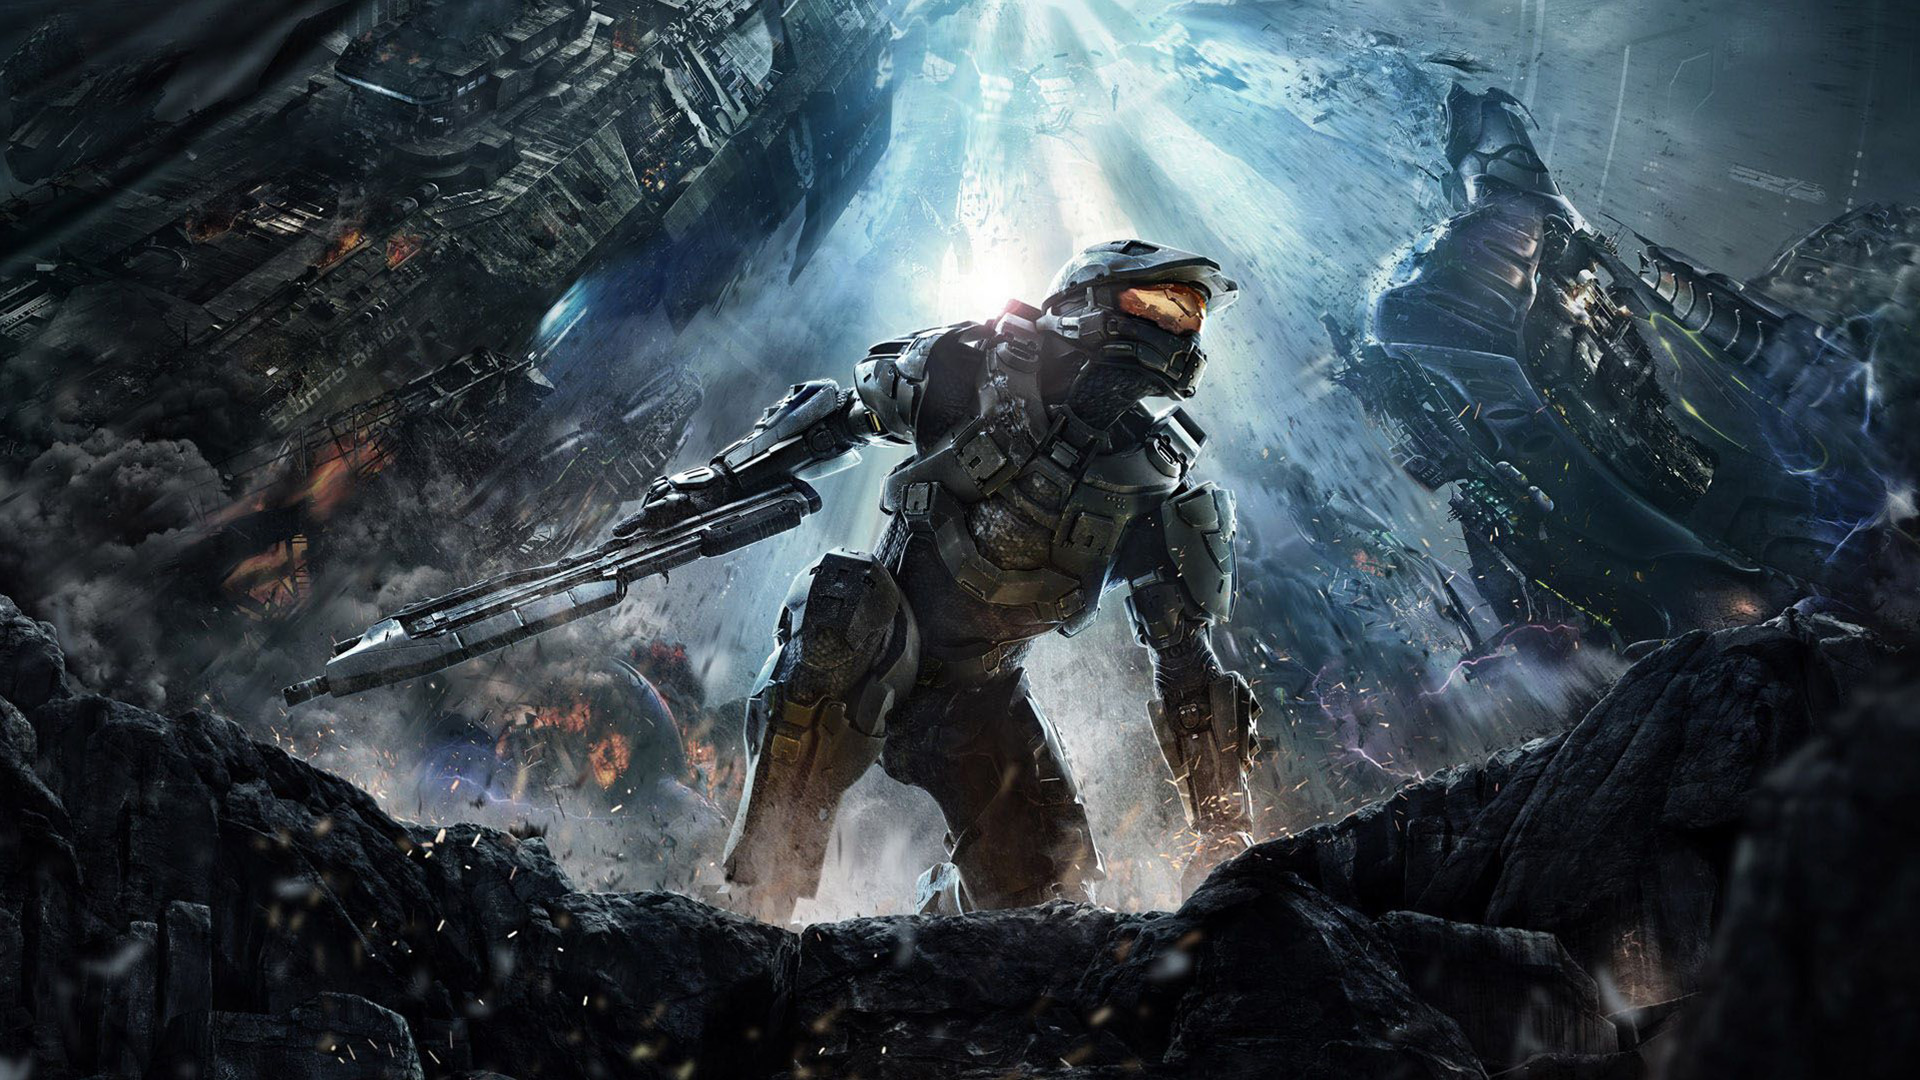 Halo games in order: Halo 4 art showing a kneeling Master Chief surrounding by rubble and debris.